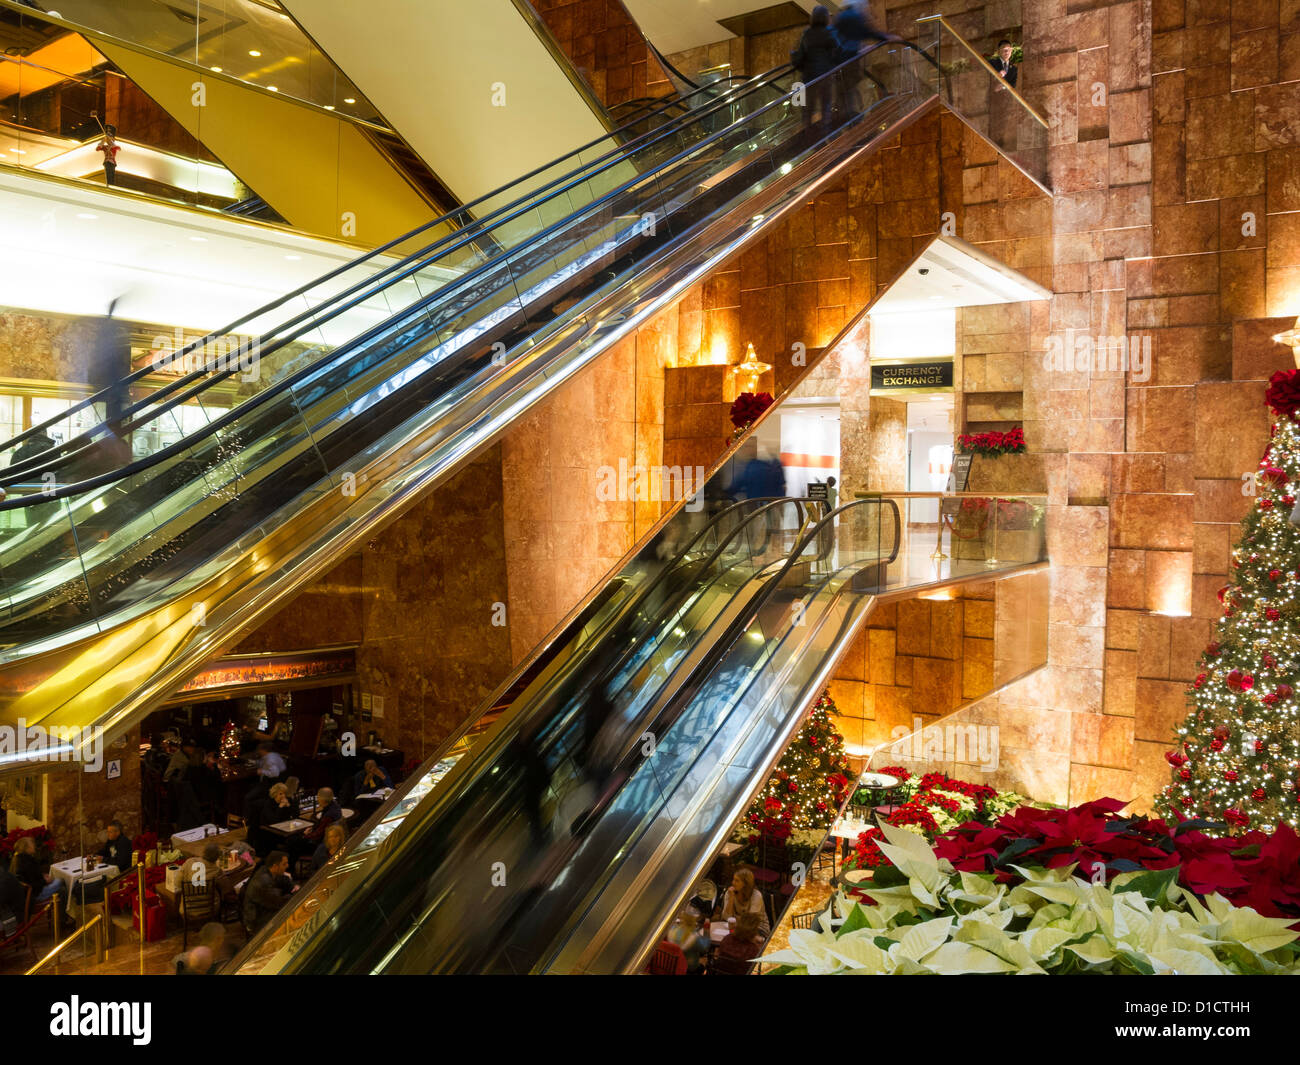 Public Space Atrium with Holiday Decorations, Trump Tower, NYC Stock Photo